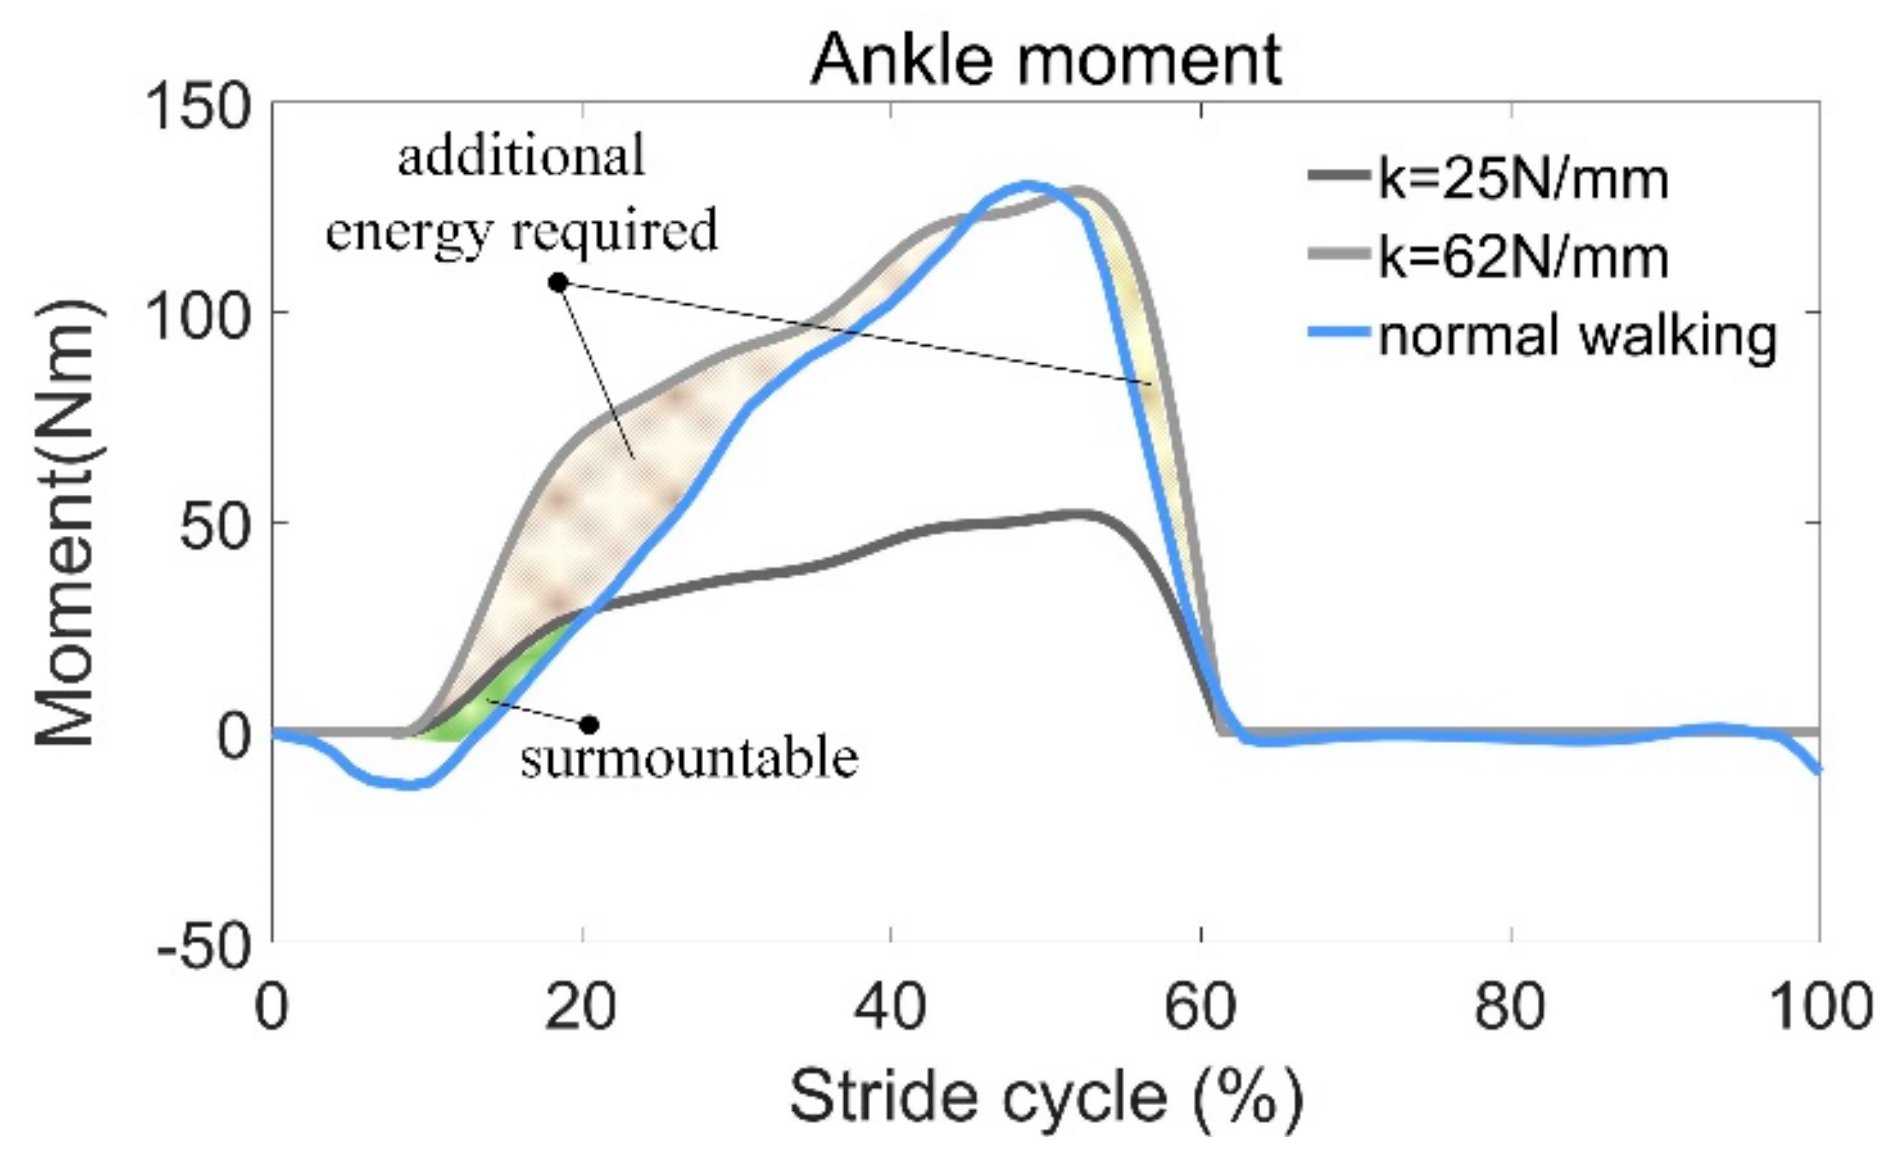 The composition of the calf muscles, which plays a key role in